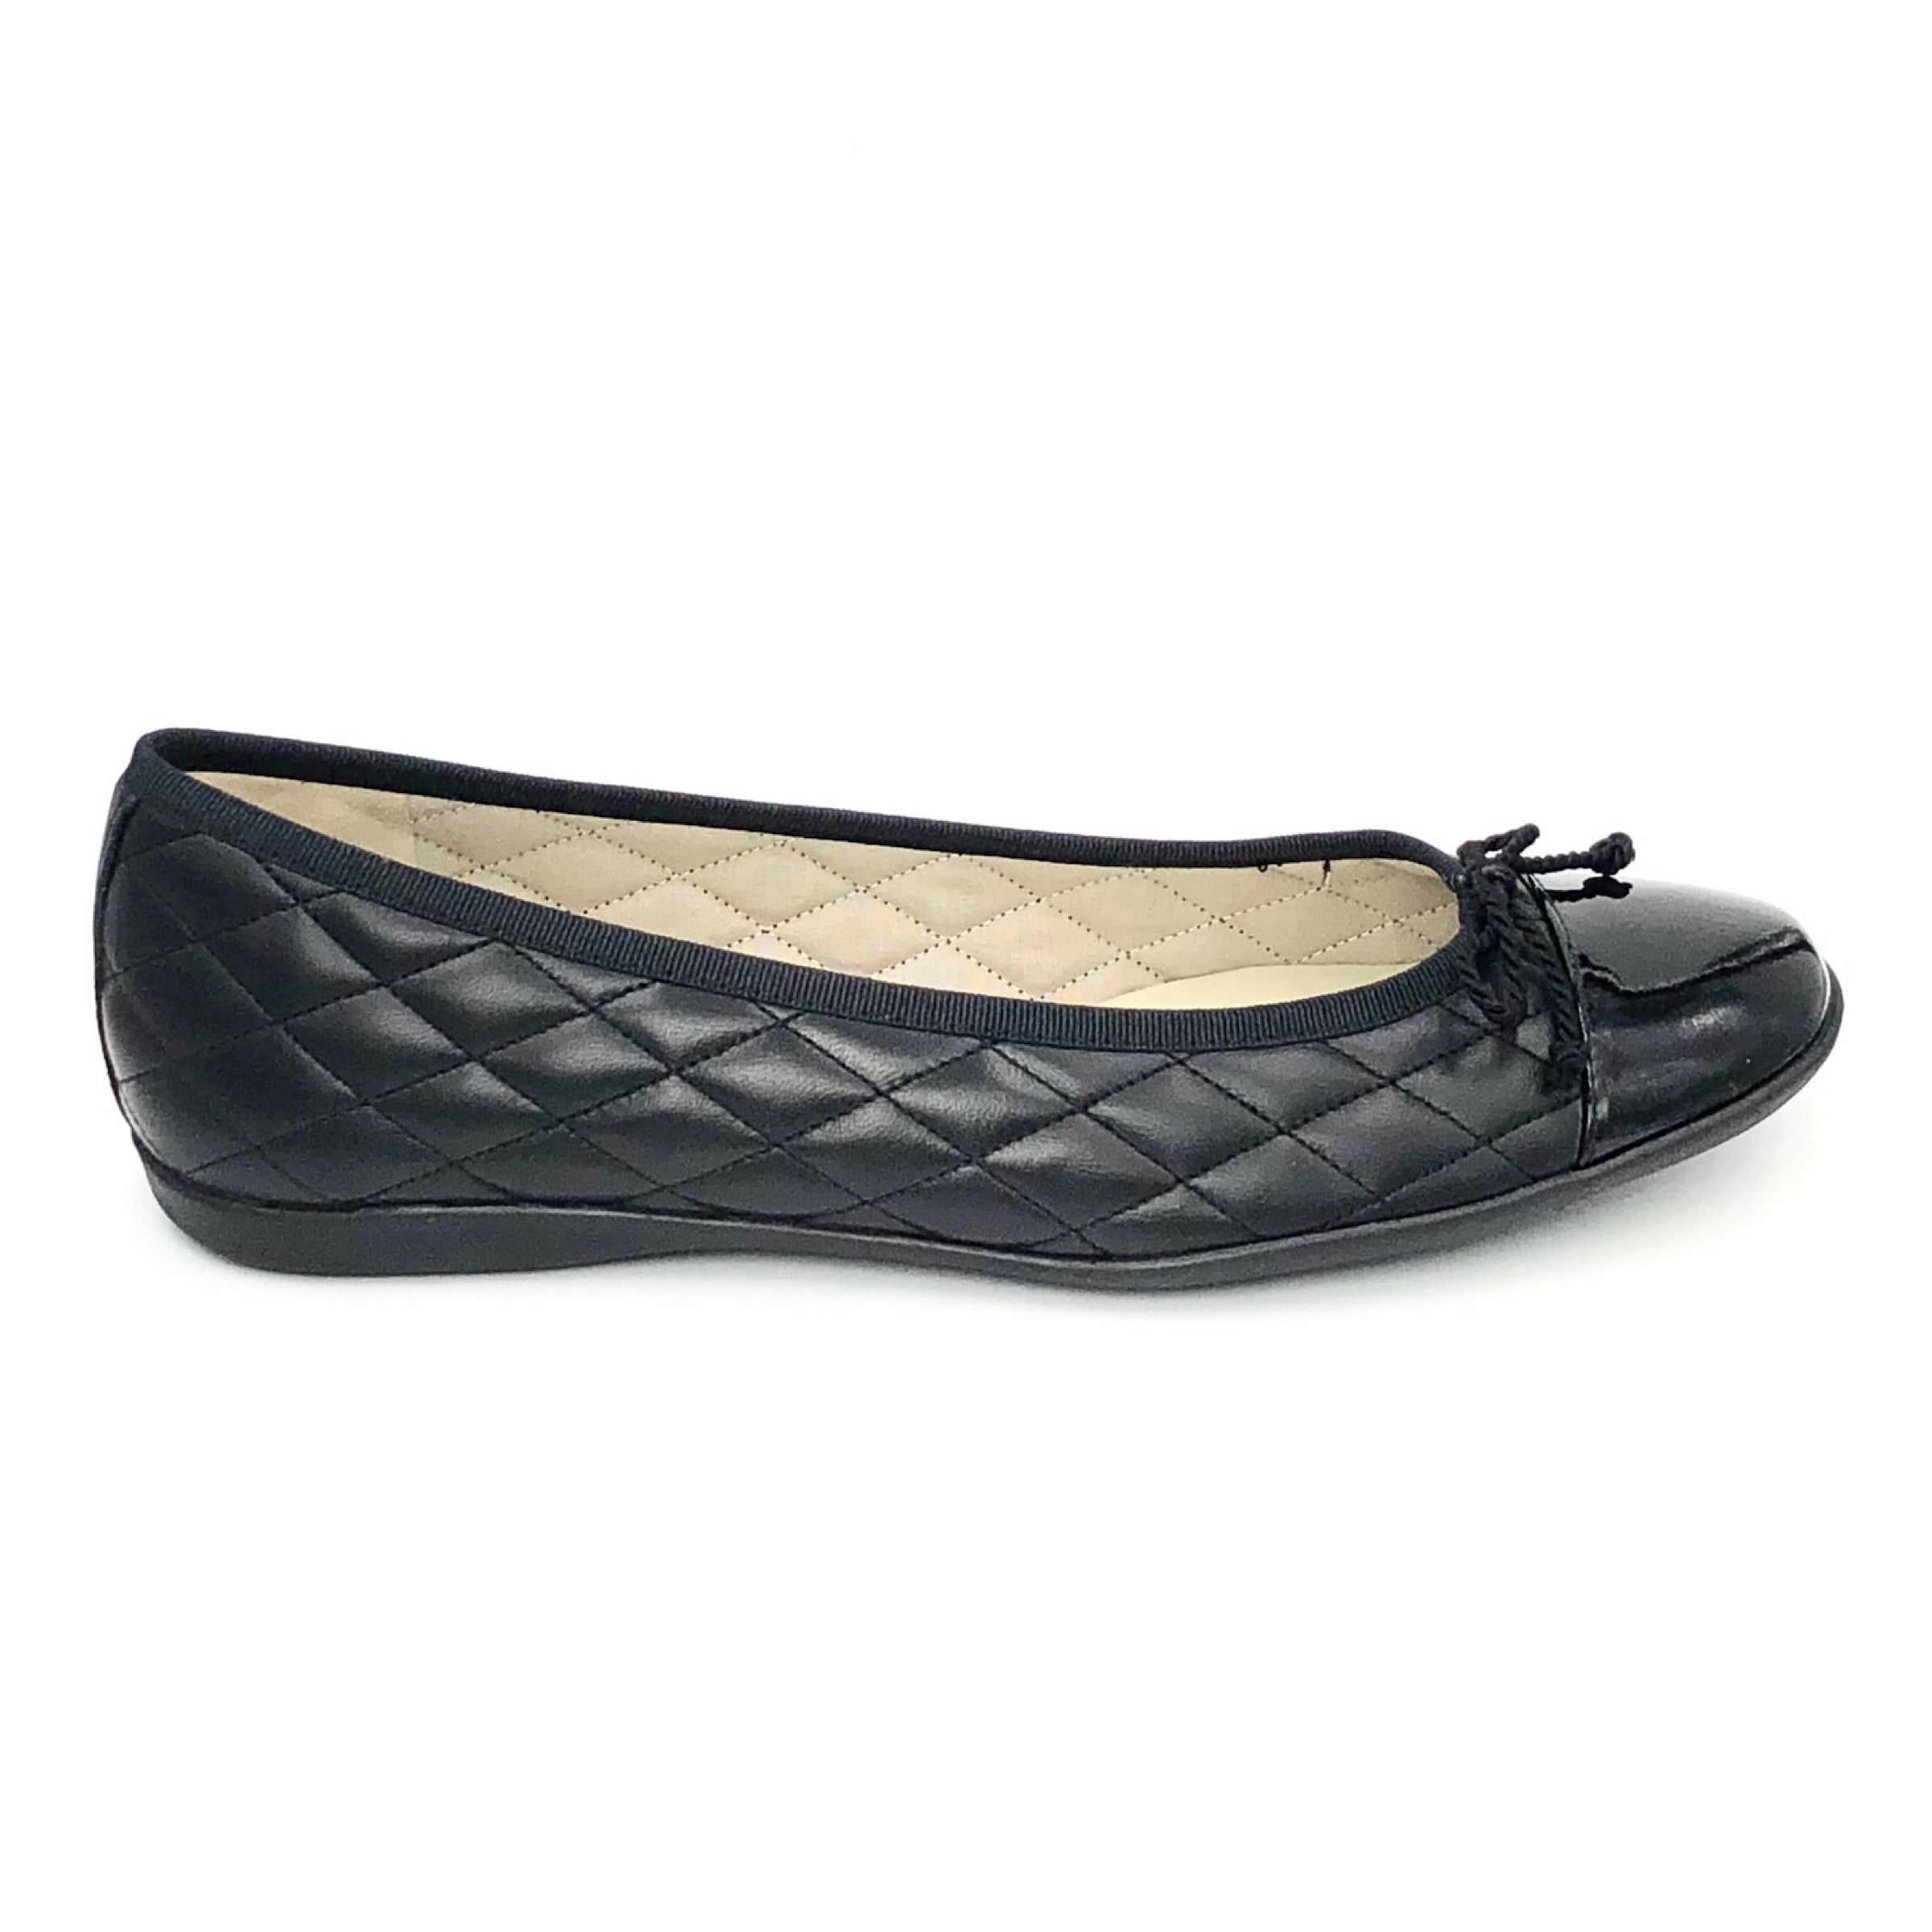 The Quilted Cap Toe Ballet in Black